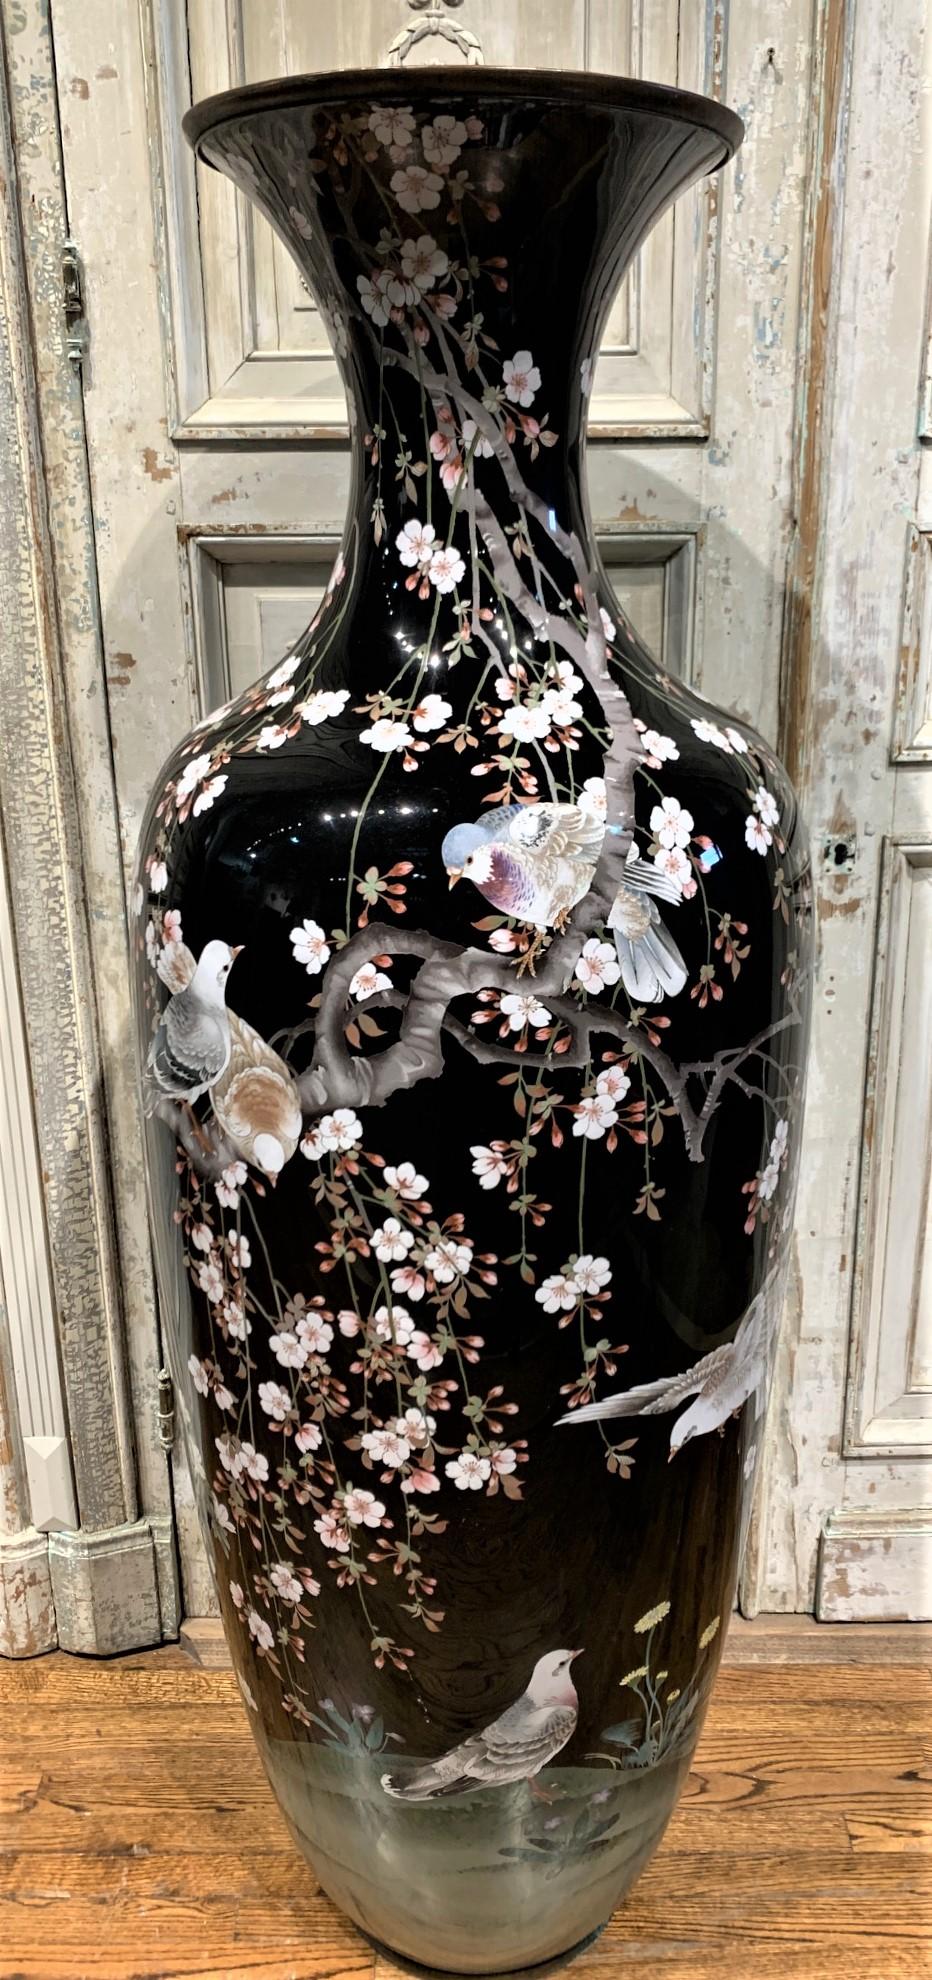 Impressive palace size 19th century Japanese cloisonné enamel narrow-neck vase. Finely decorated overall with flowering trees and colorful exotic birds on an ebony field. Rare and sought-after large scale,

circa 1890.